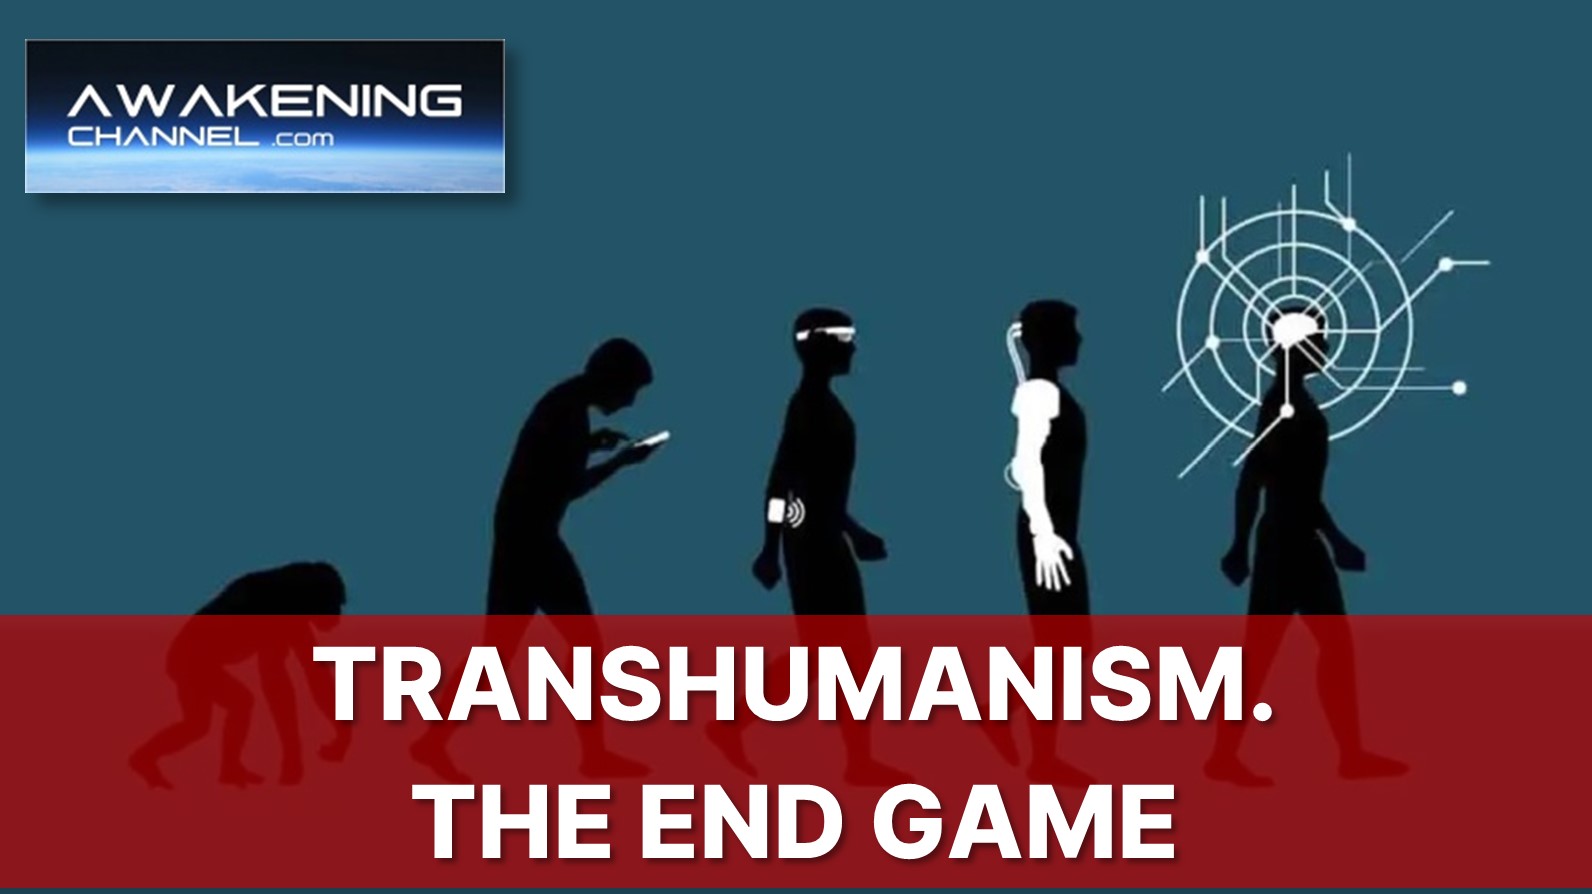 Transhumanism. The End Game